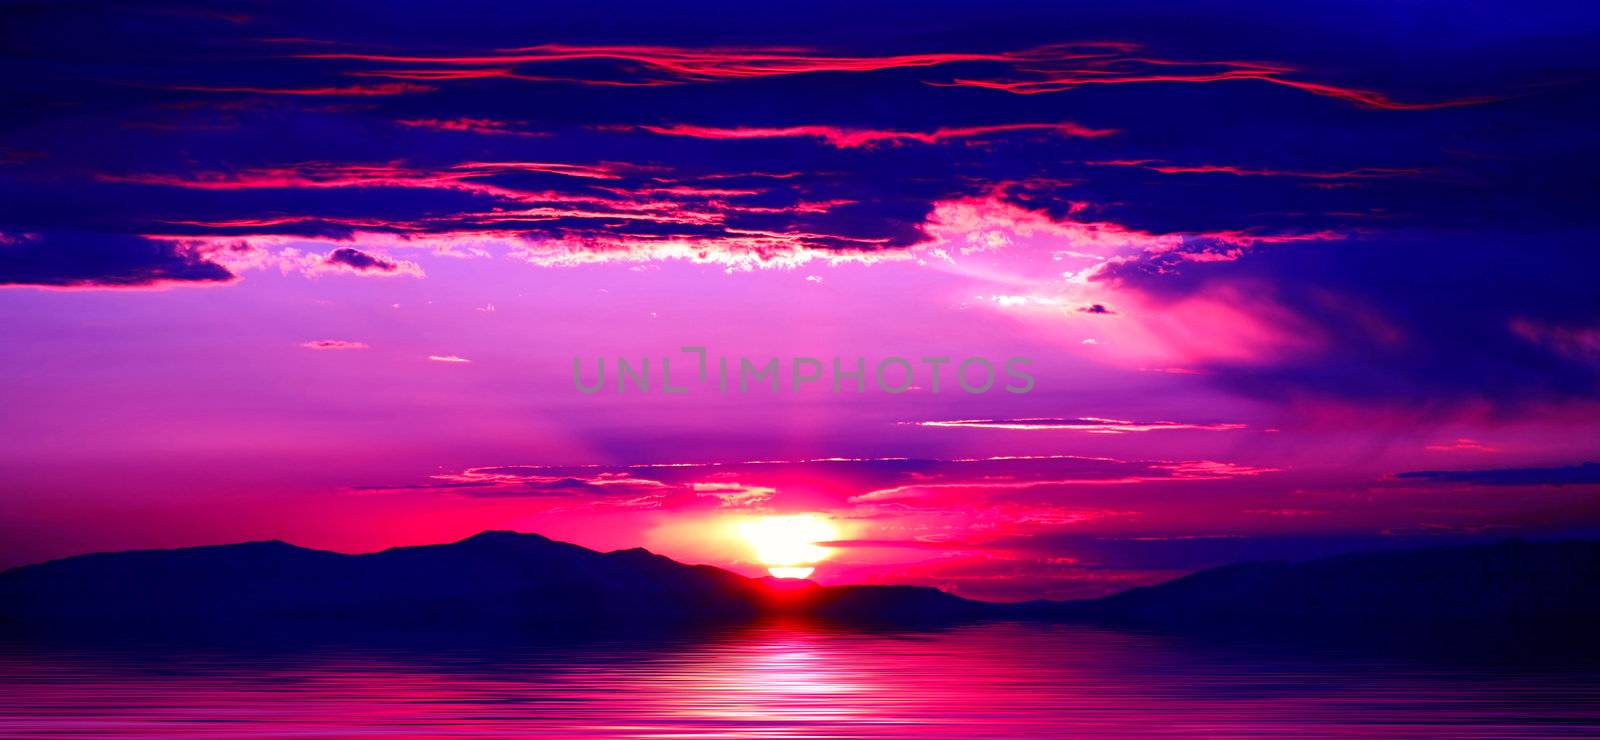 Beautiful mountains with spectacular purple sunrise or sunset at Lake Tahoe in California and Nevada